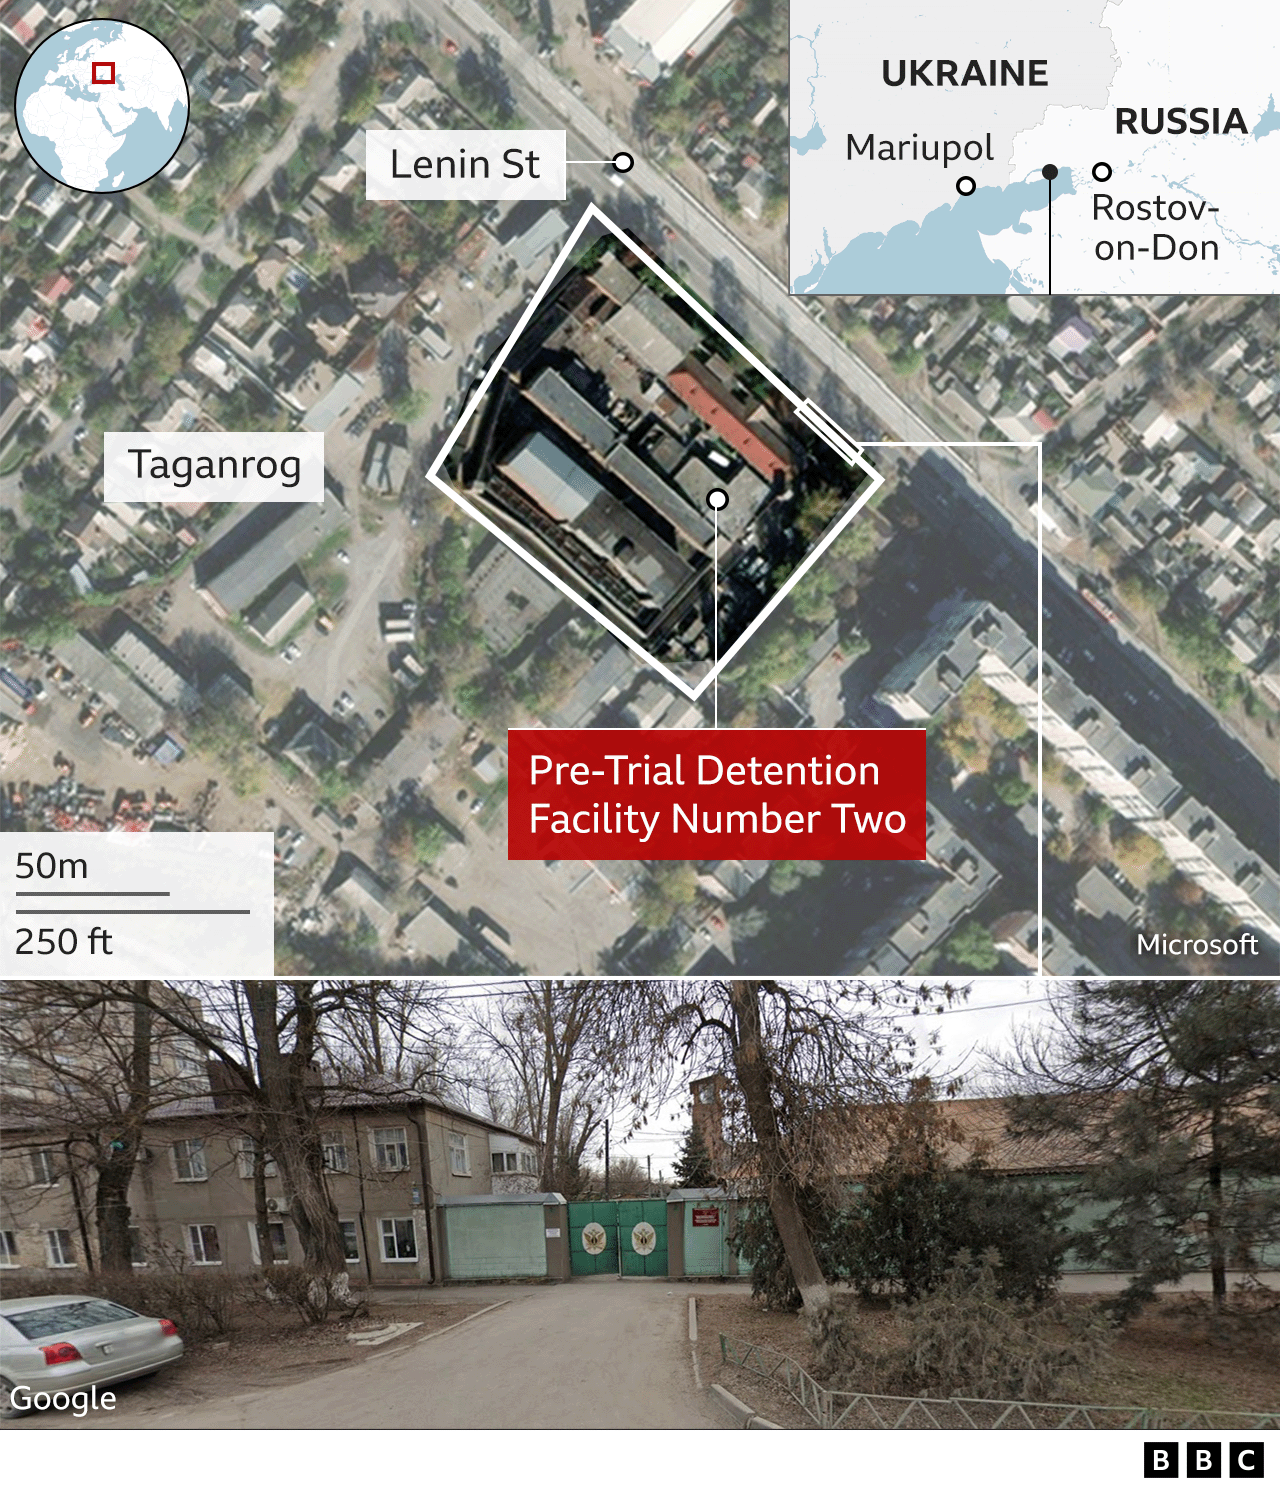 Graphic showing Pre-Trial Detention Facility Number Two in Taganrog, south-west Russia, and its location